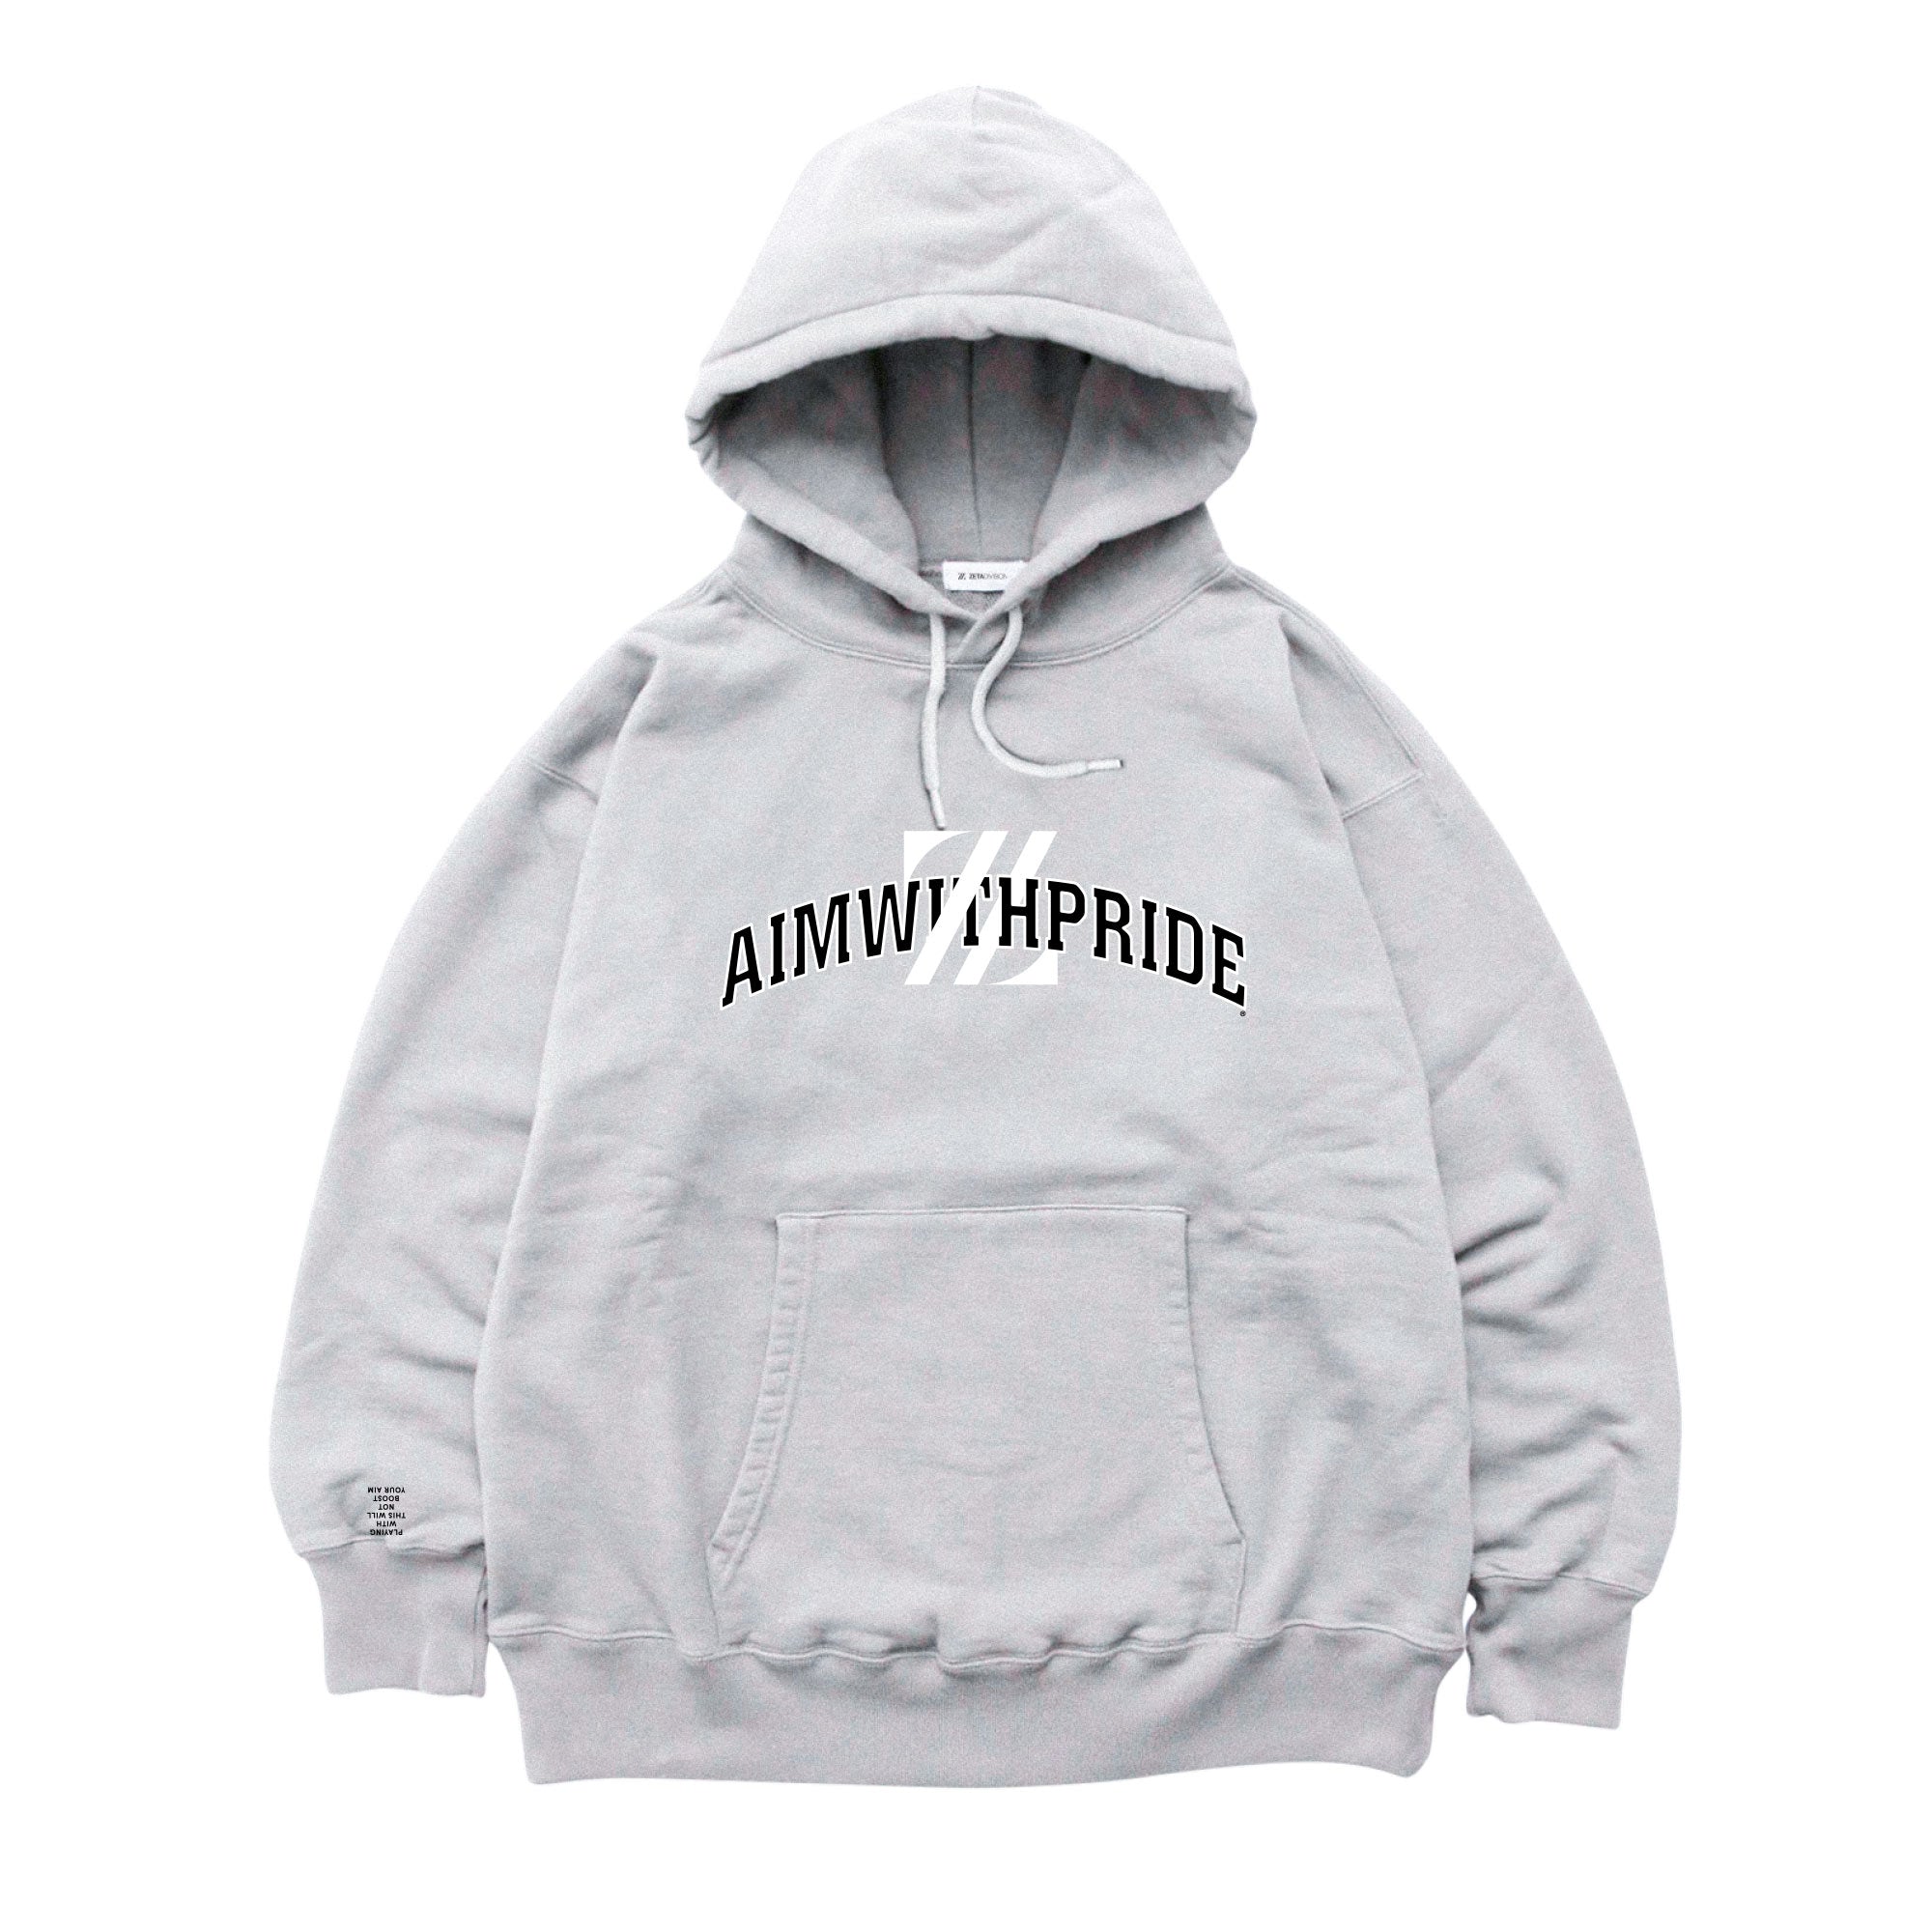 A.W.P.Z COLLAGE HOODIE / HEATHER GRAY